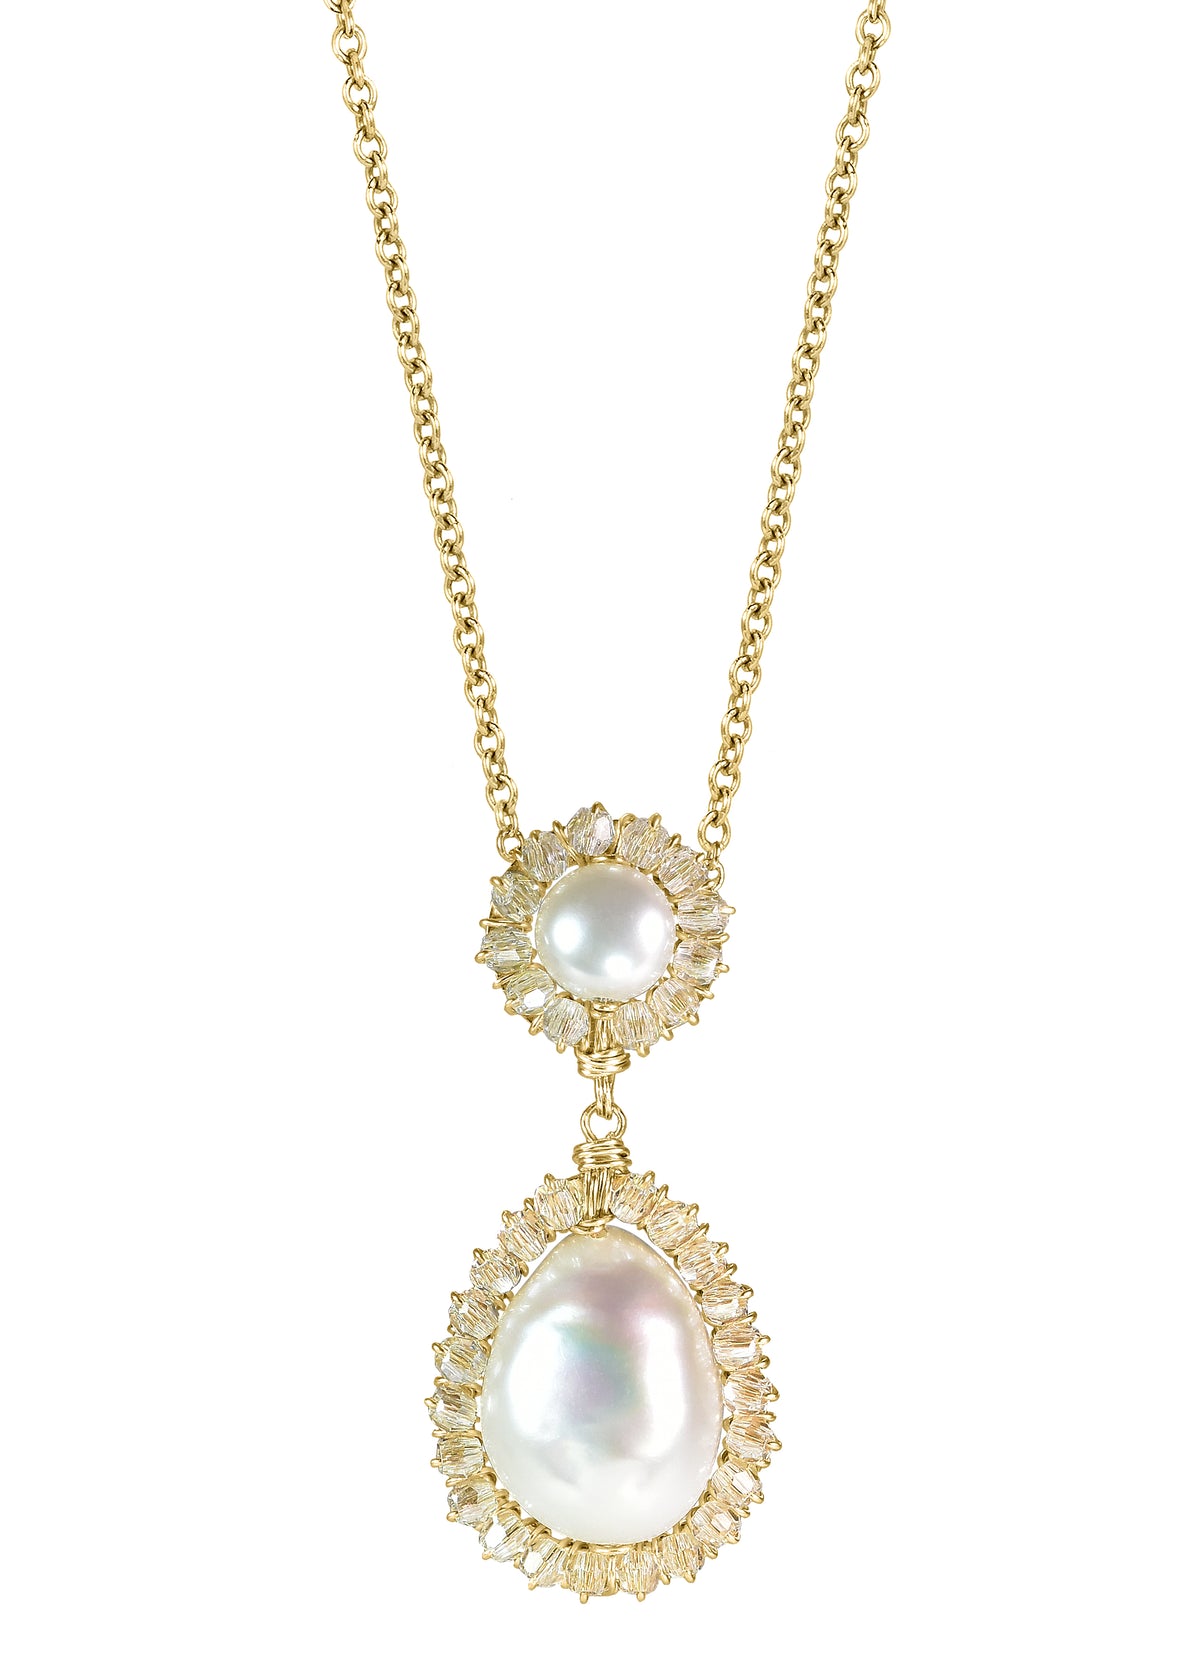 Crystal Freshwater pearl 14k gold fill Necklace measures 16-1/8&quot; in length Pendant measures 1-1/8&quot; in length and 1/2&quot; in width at the widest point Handmade in our Los Angeles studio